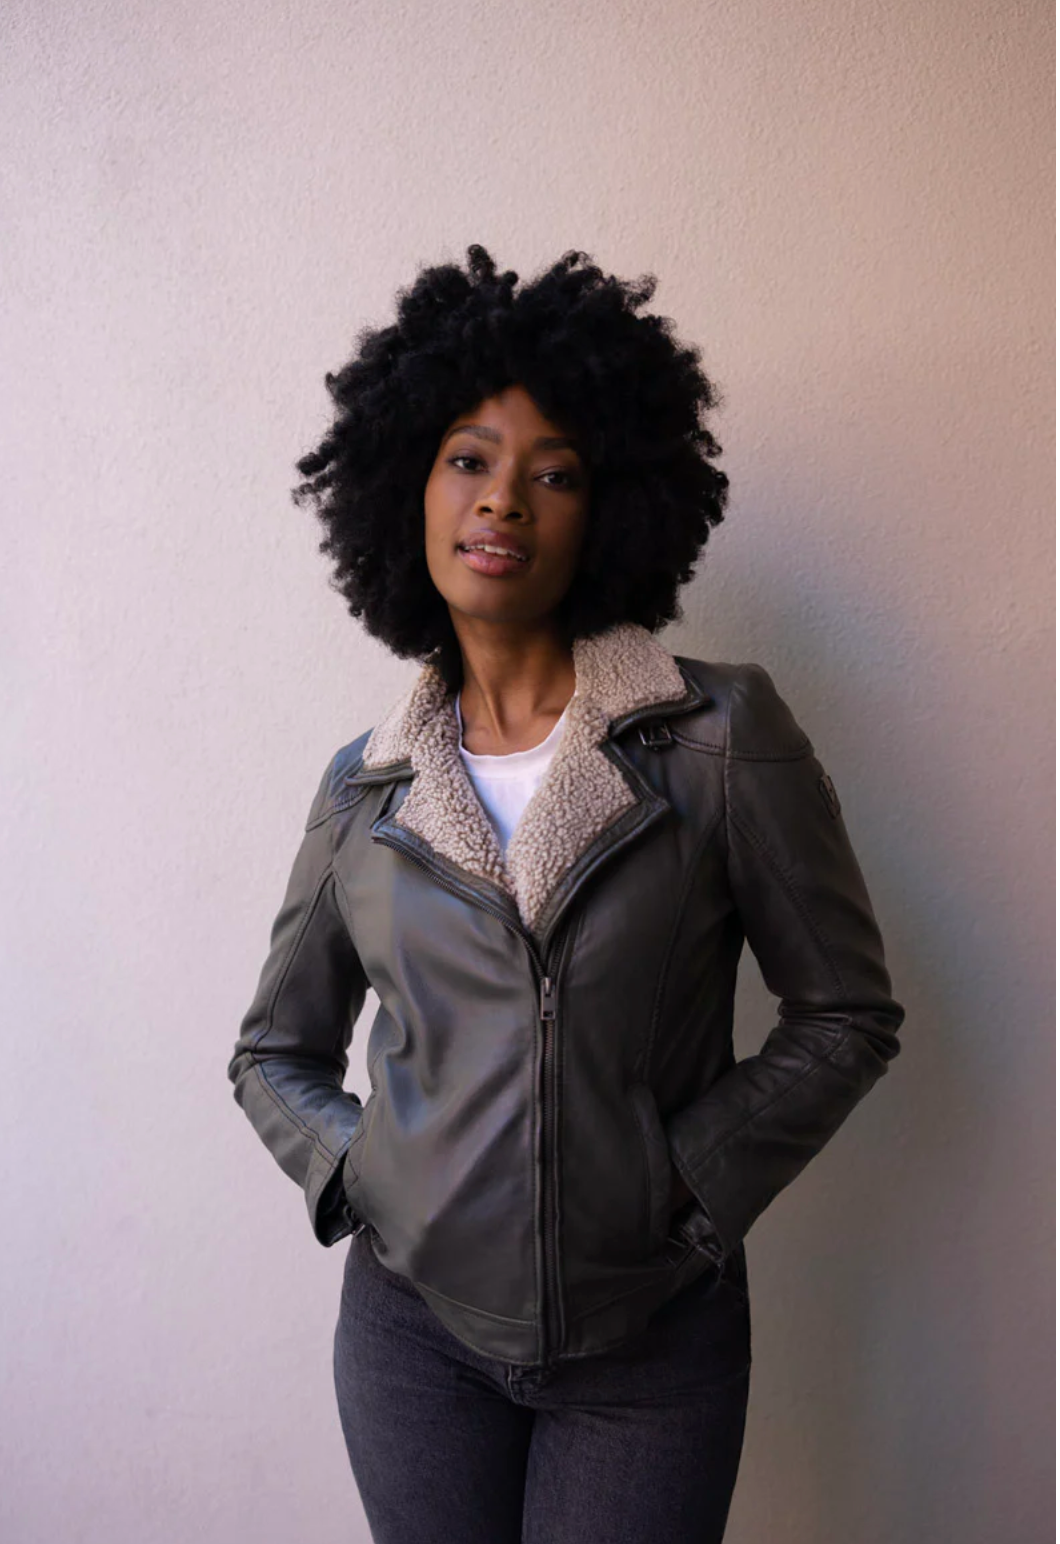 JENJA CF LEATHER JACKET IN OLIVE - Romi Boutique